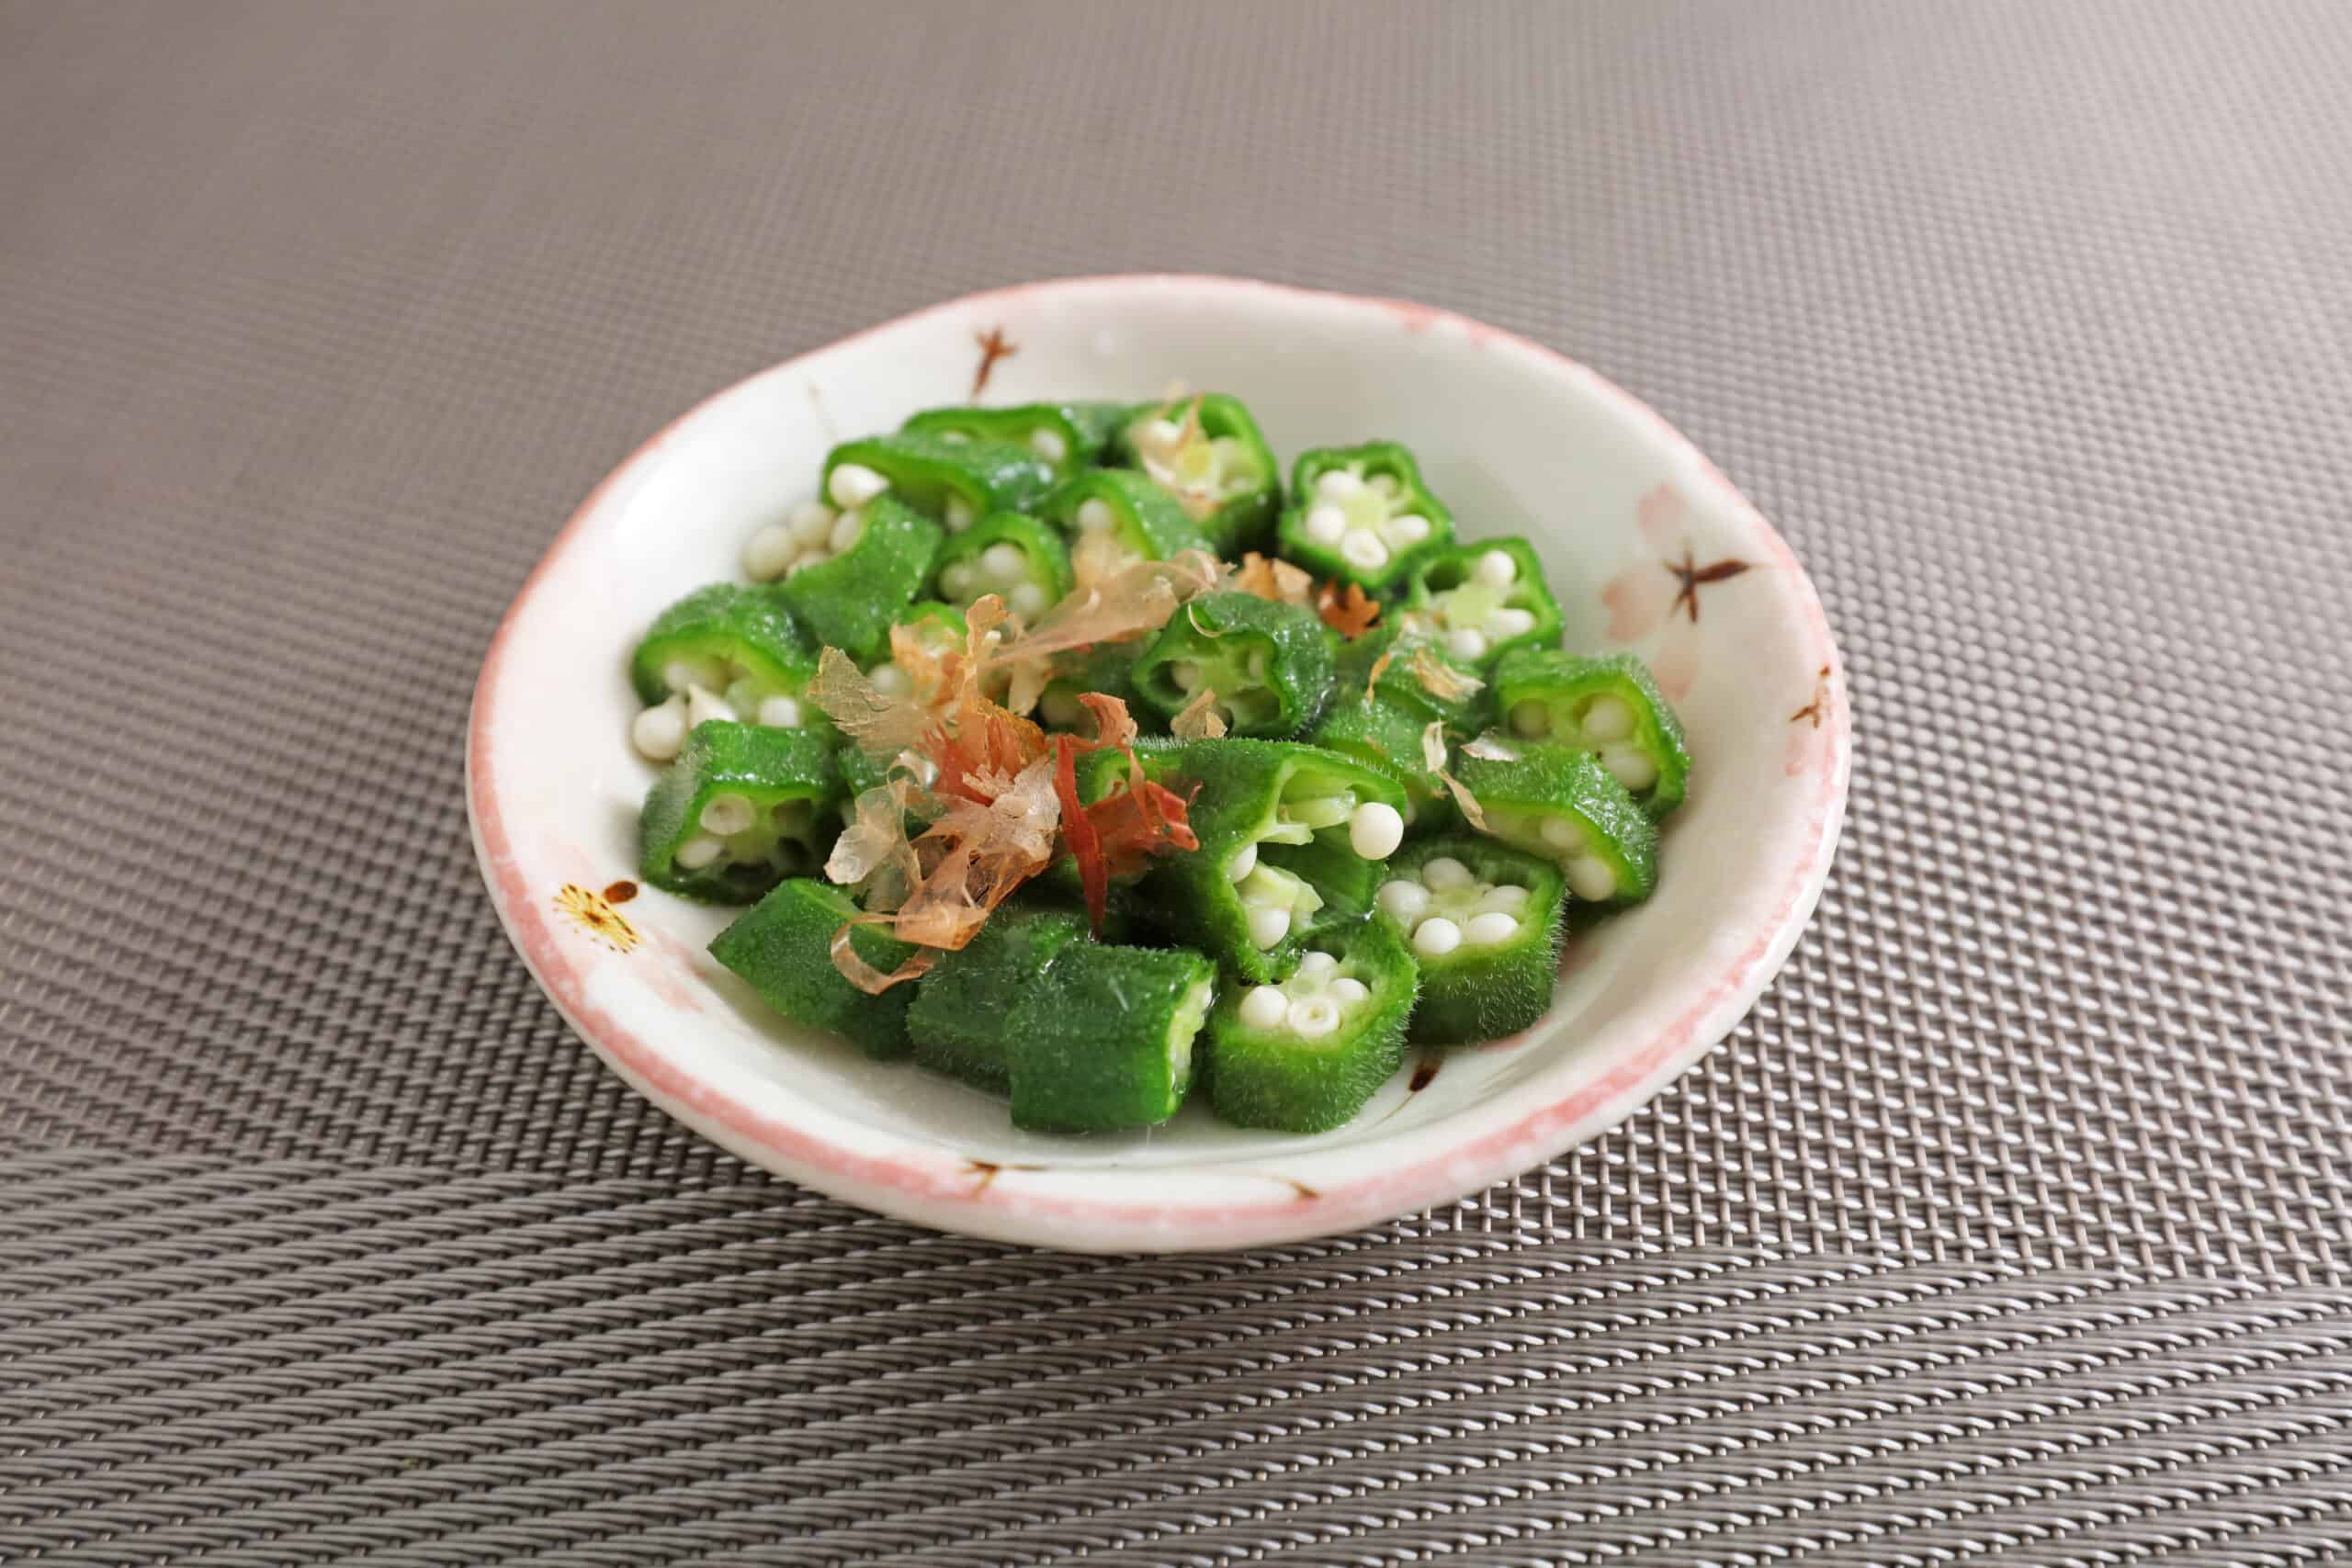 Boiled okra with soy sauce